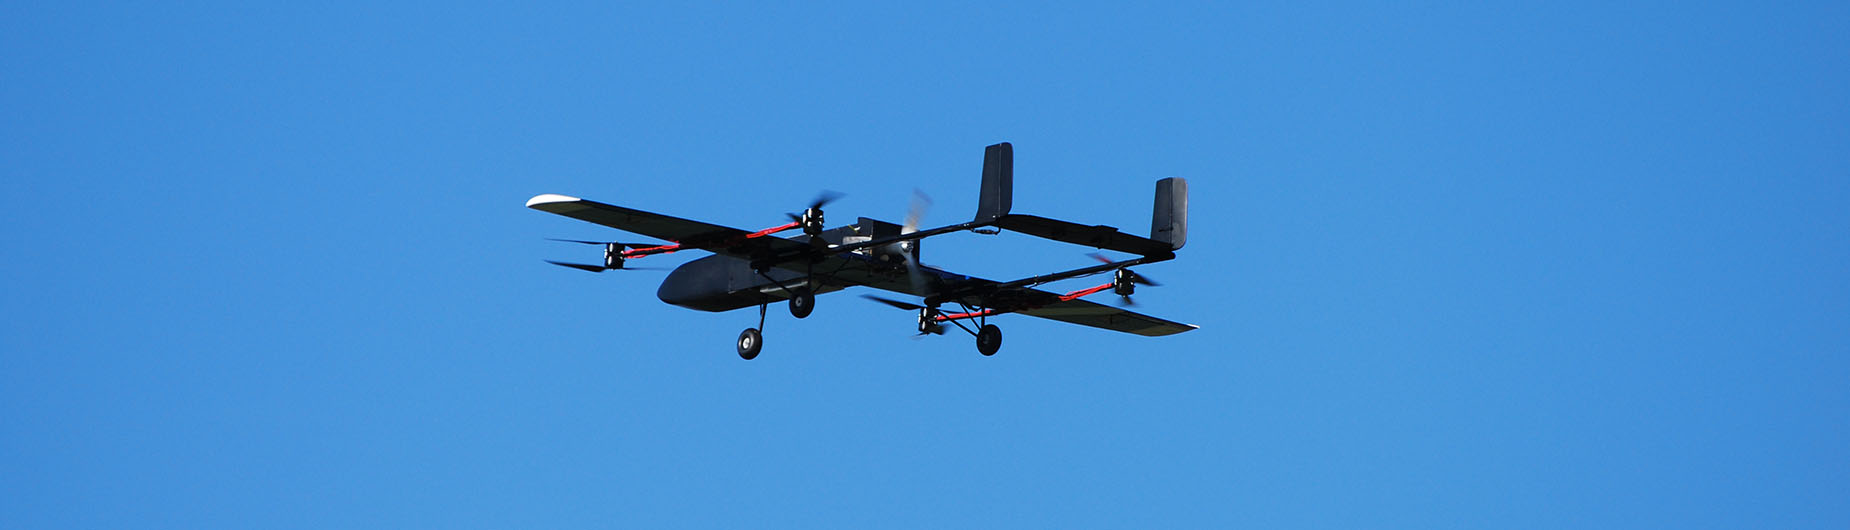 BML unmanned aircraft flying autonomously